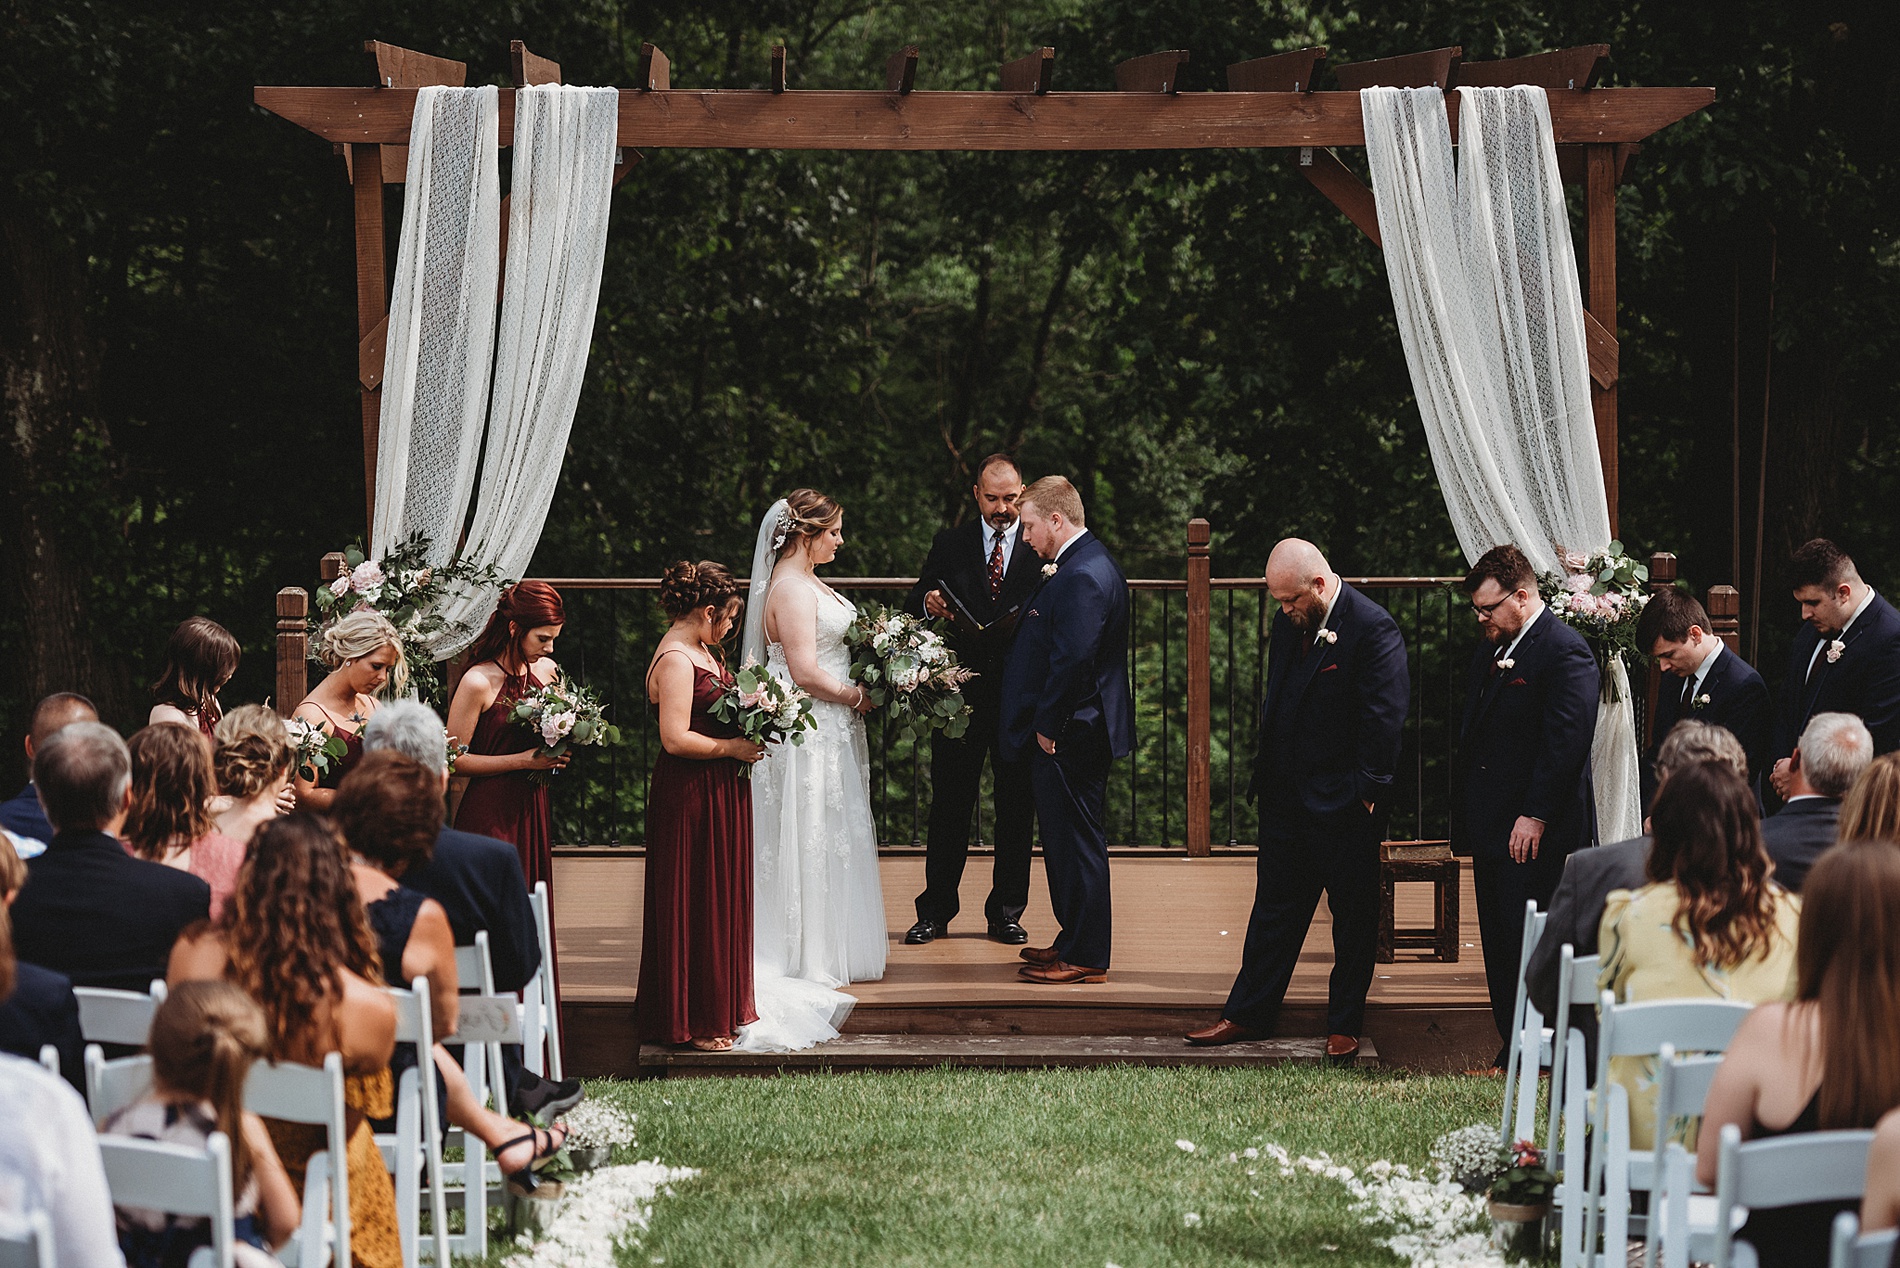 Outdoor wedding ceremony at century farms in Ohio  one of The Top 14 Barn Wedding Venues in Ohio